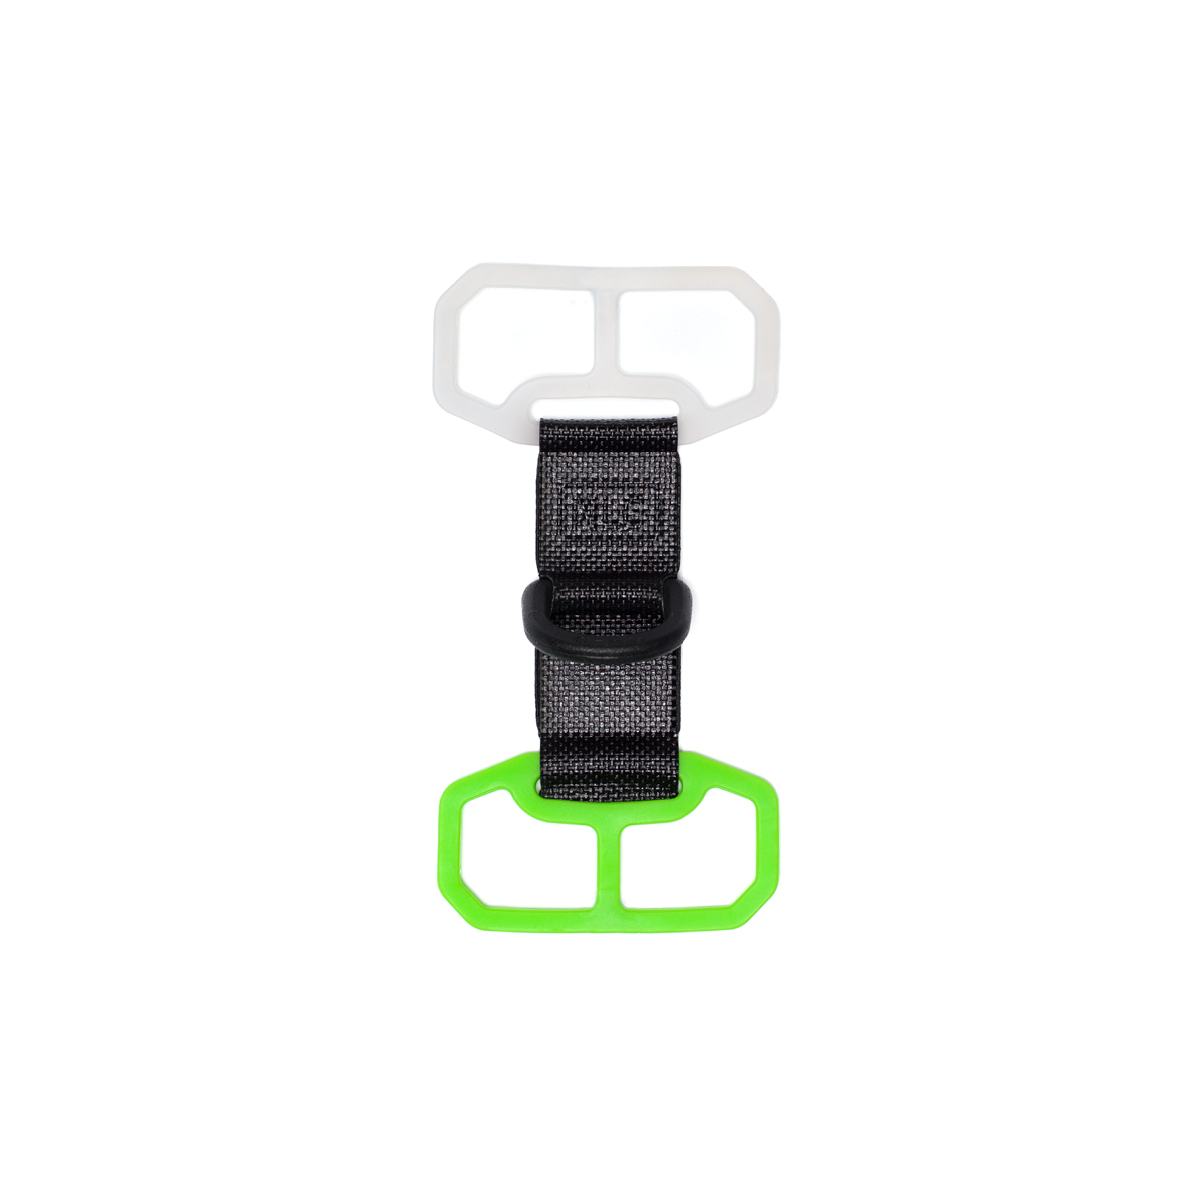 NLG Phone Harness from Columbia Safety